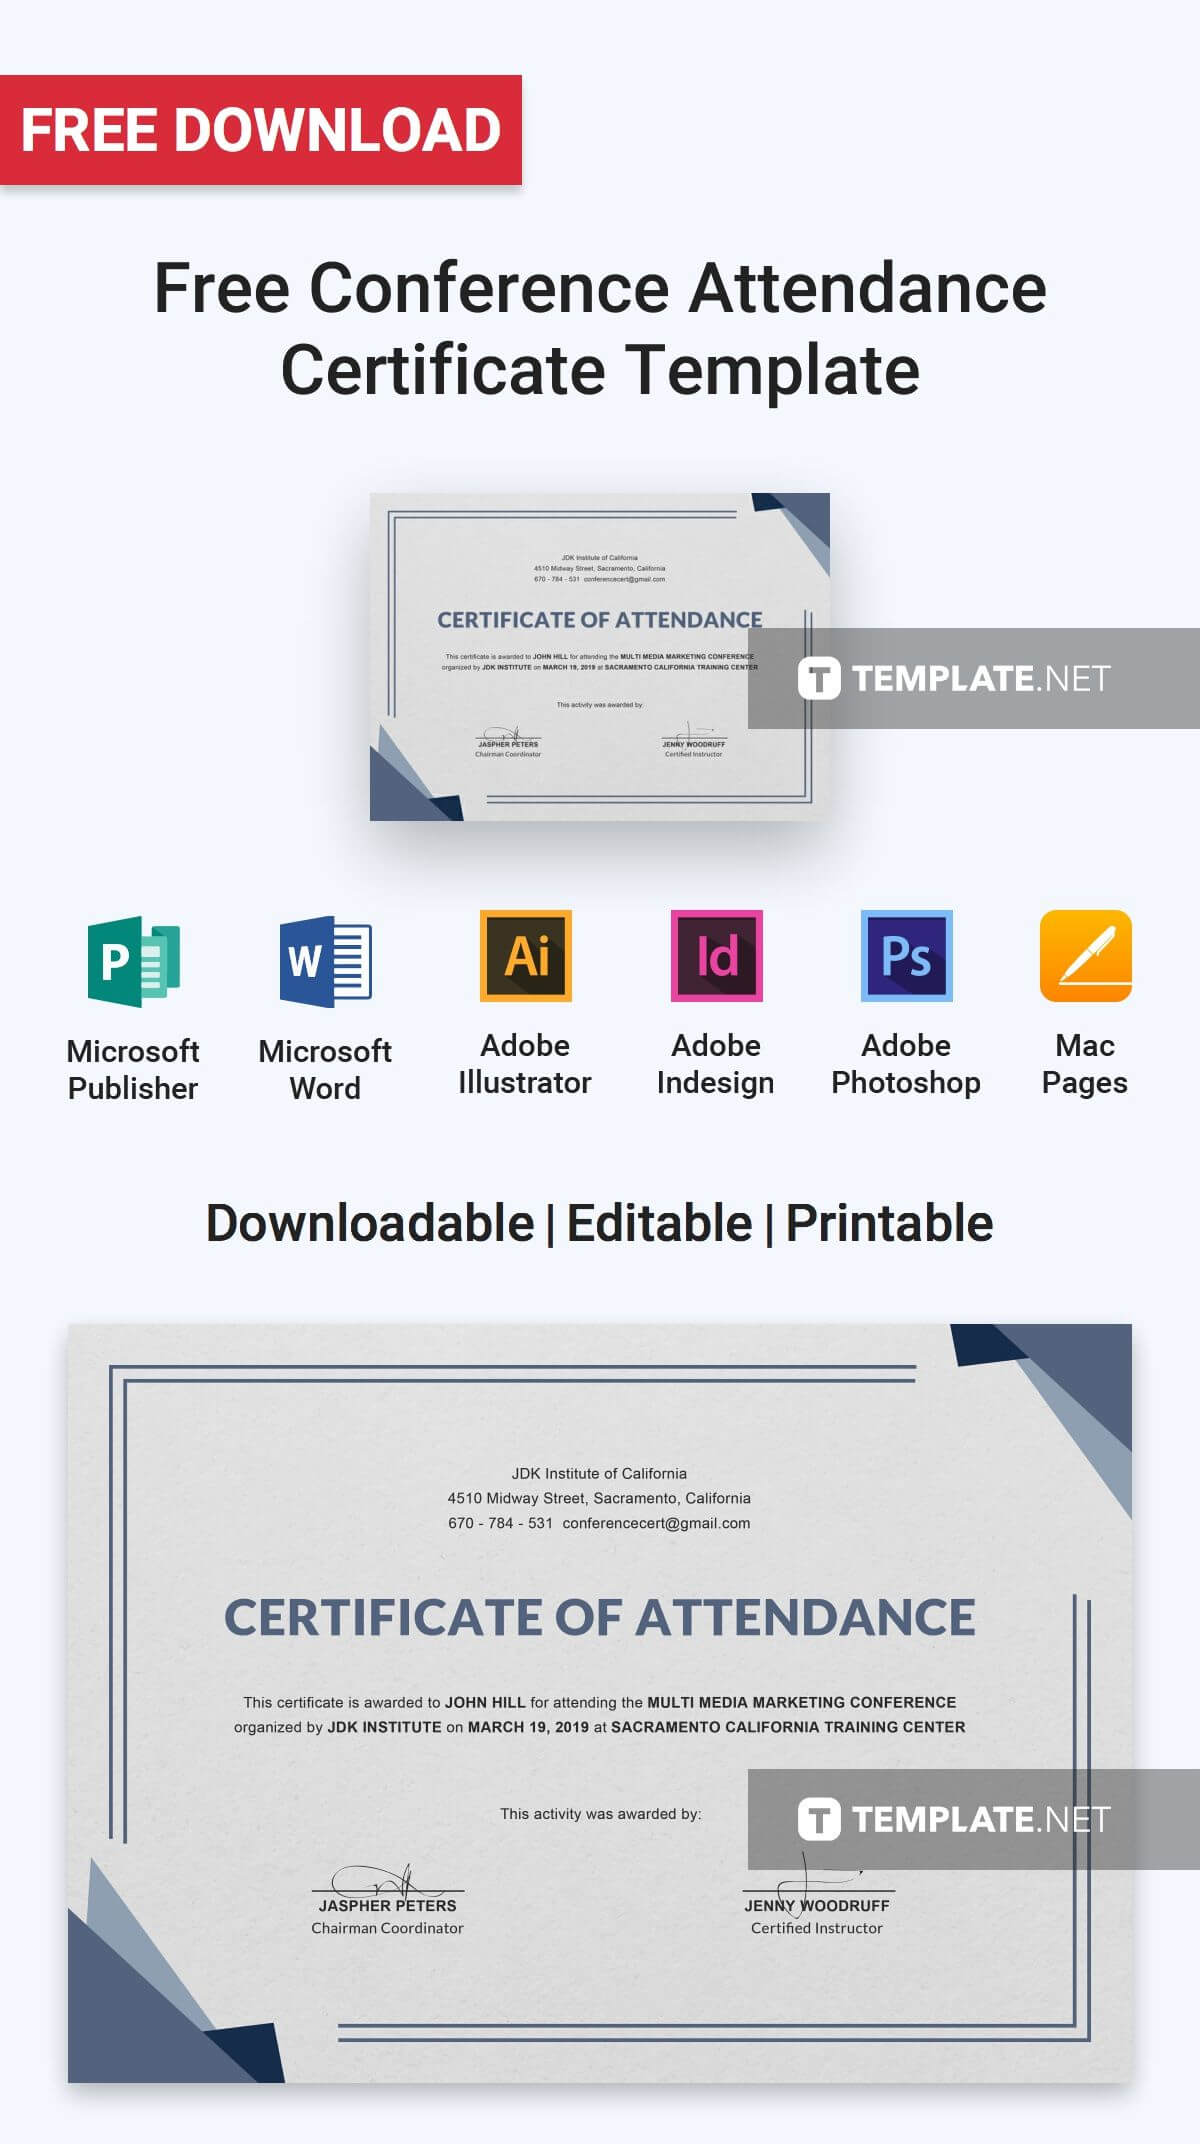 Free Conference Attendance Certificate | Attendance Throughout Certificate Of Attendance Conference Template